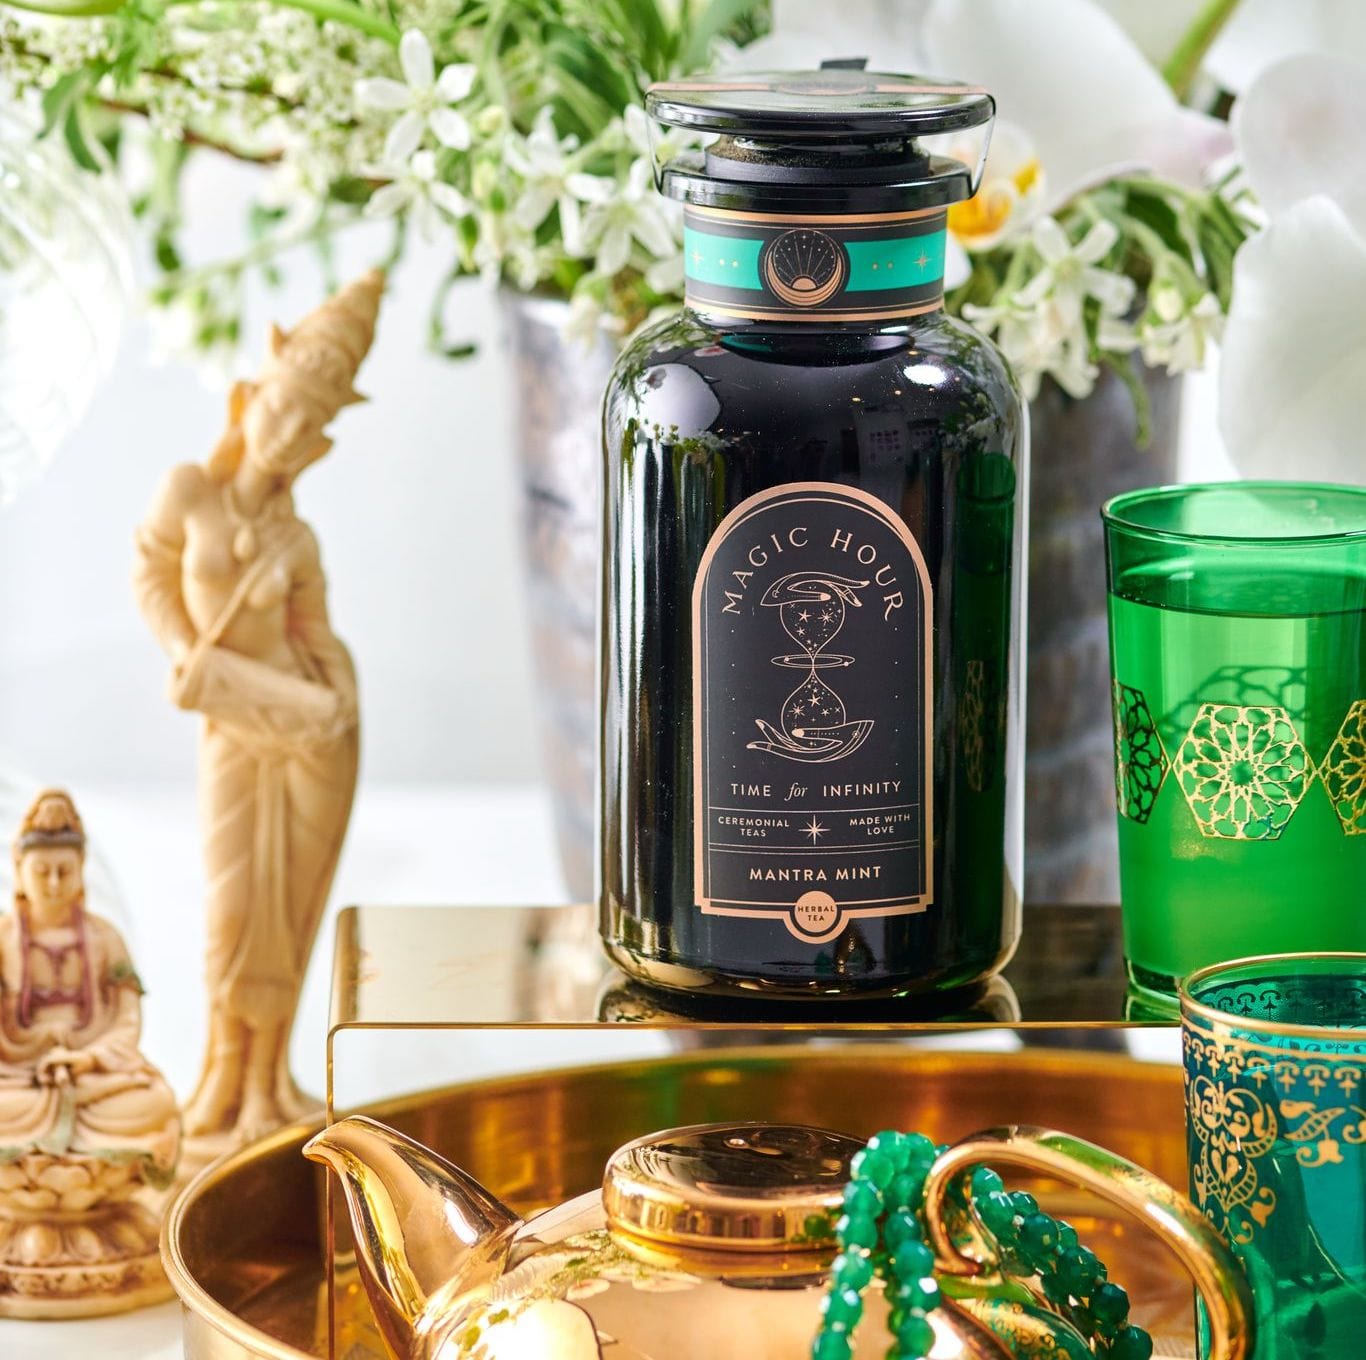 A teal and gold-themed tea setup featuring a black jar of &quot;Mantra Mint™ Herbal Tea&quot; by Club Magic Hour with an intricate label, surrounded by vibrant green glasses, a golden teapot, beads, and statues. It&#39;s set on a reflective golden surface with flowers in the background.